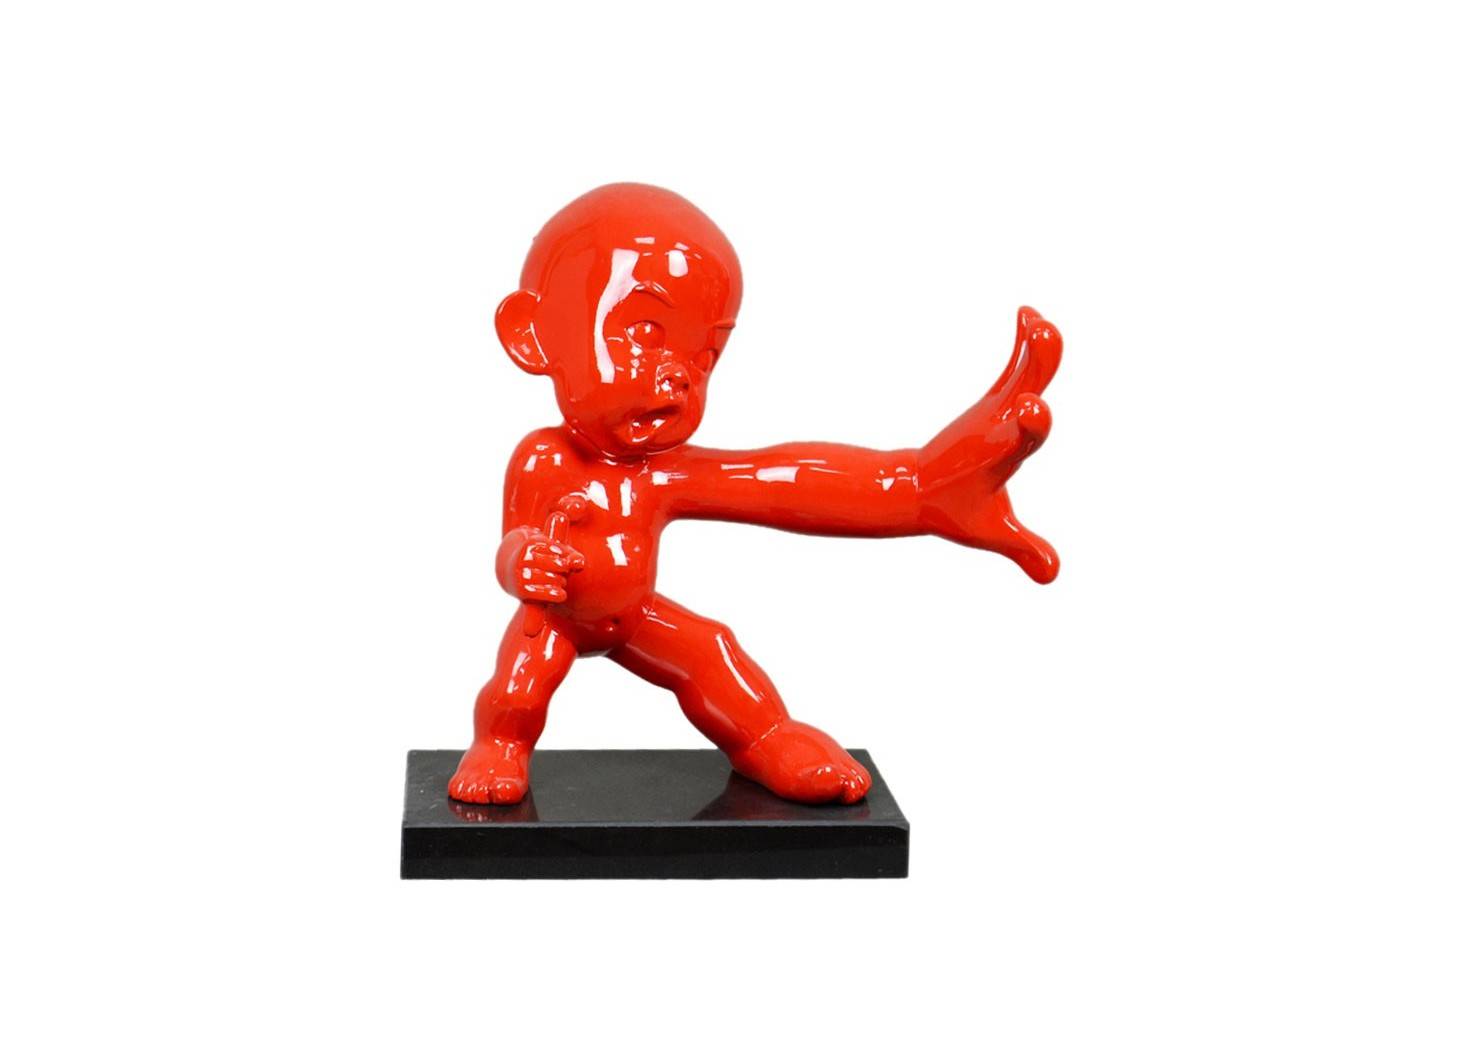 Statue of a baby ninja in red color